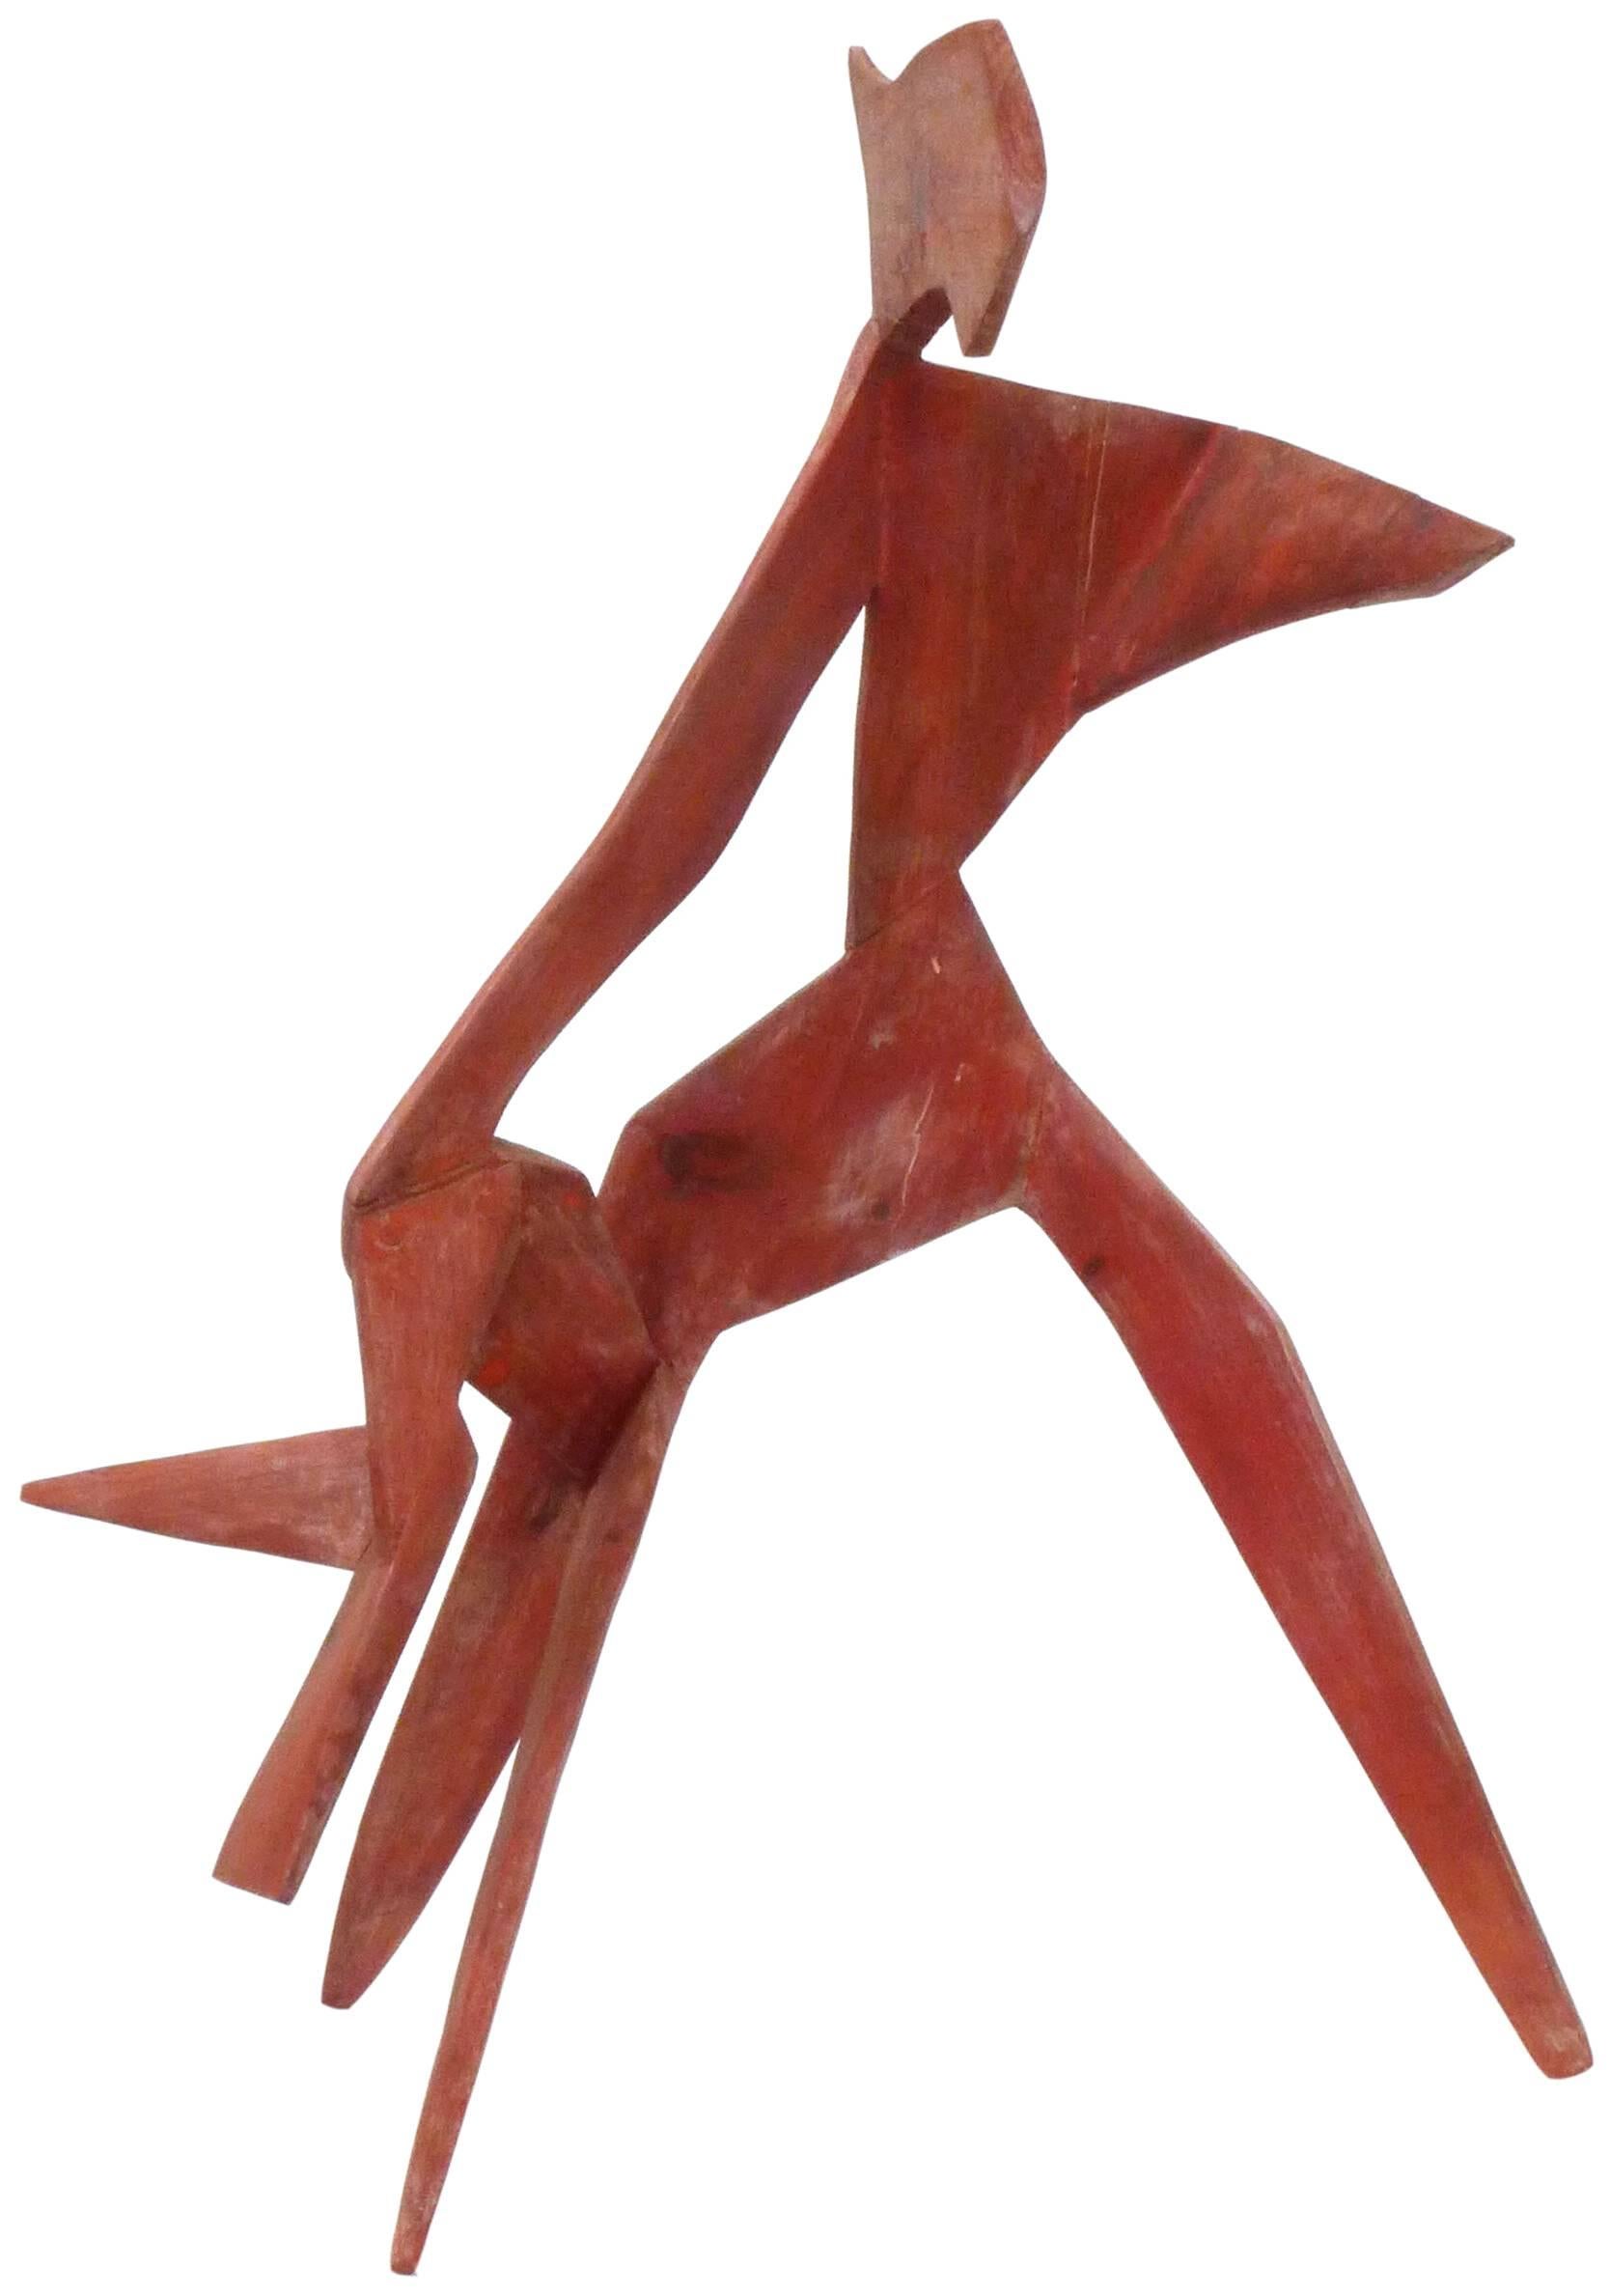 A spectacular, modernist, abstract wood sculpture. Interestingly, both carved and dowel-construction assembled, a fantastic creature-like, anthropomorphic and expressive form exhibiting great gesture and geometry from all angles, a wonderful sense